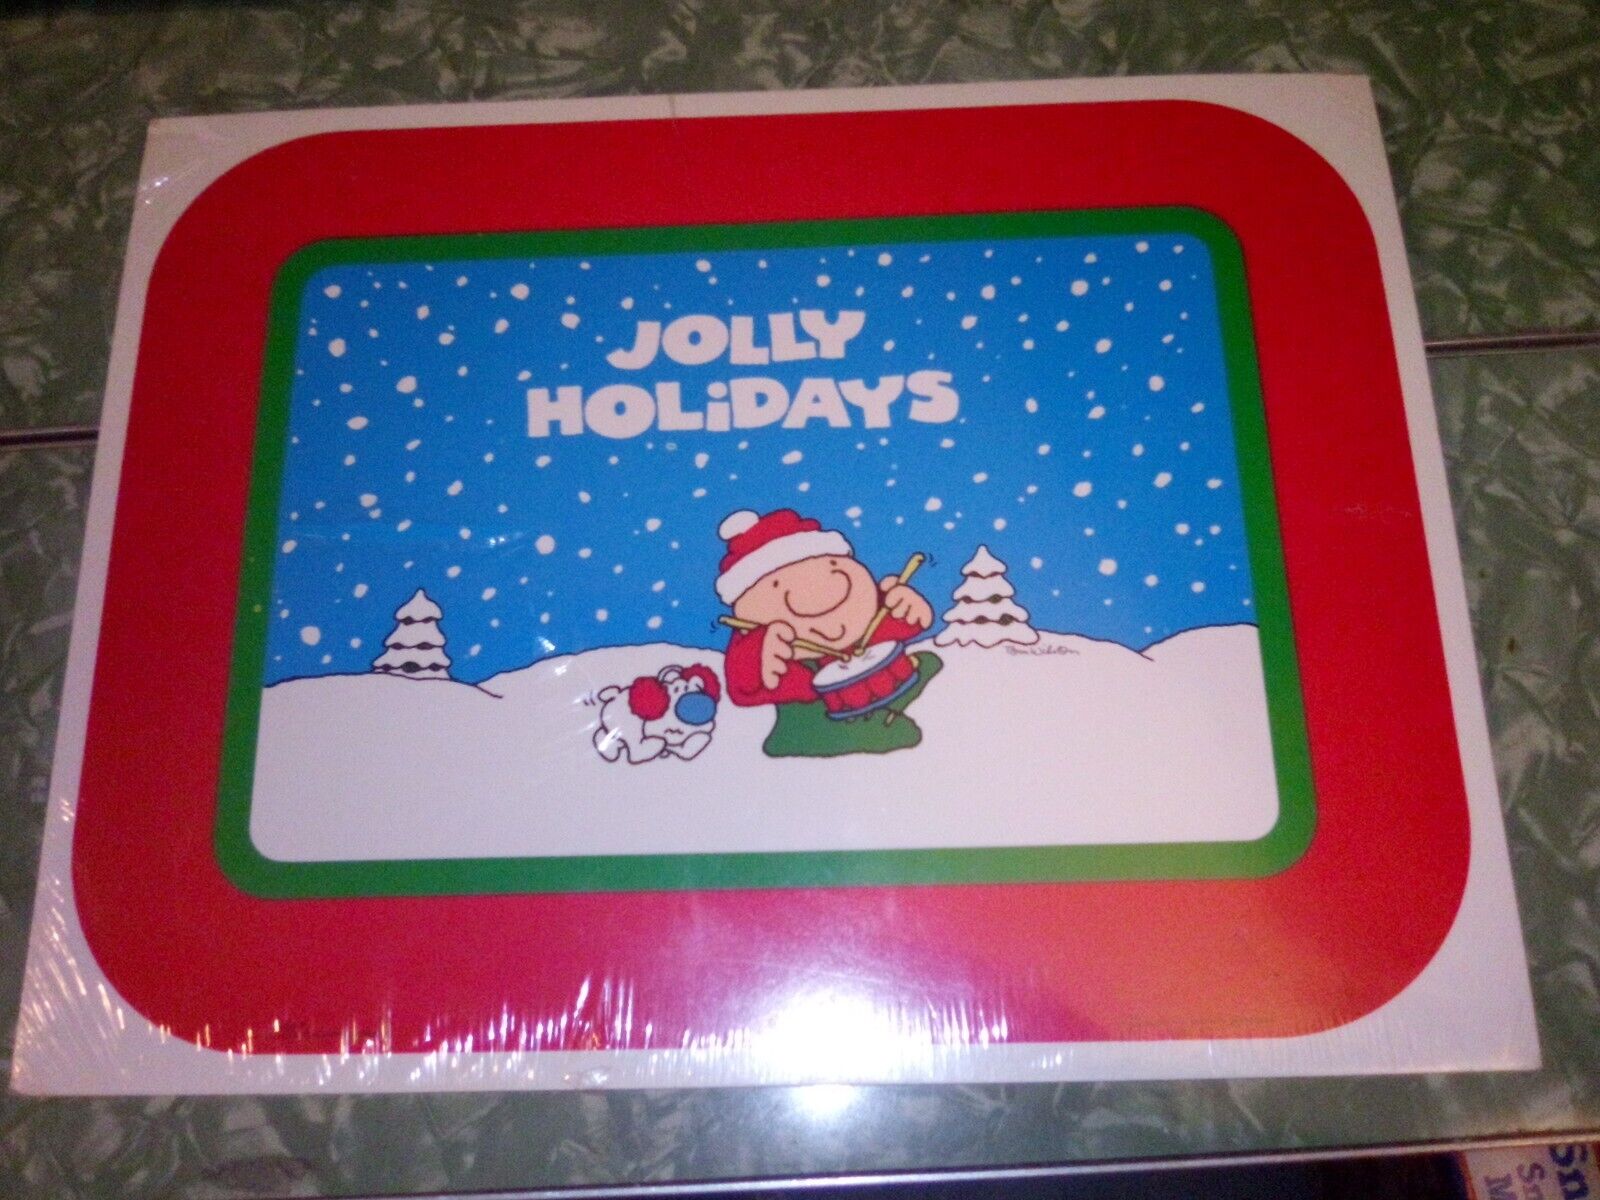  8 Ziggy's Jolly Holidays American Greetings Plastic Coated Placemats Sealed